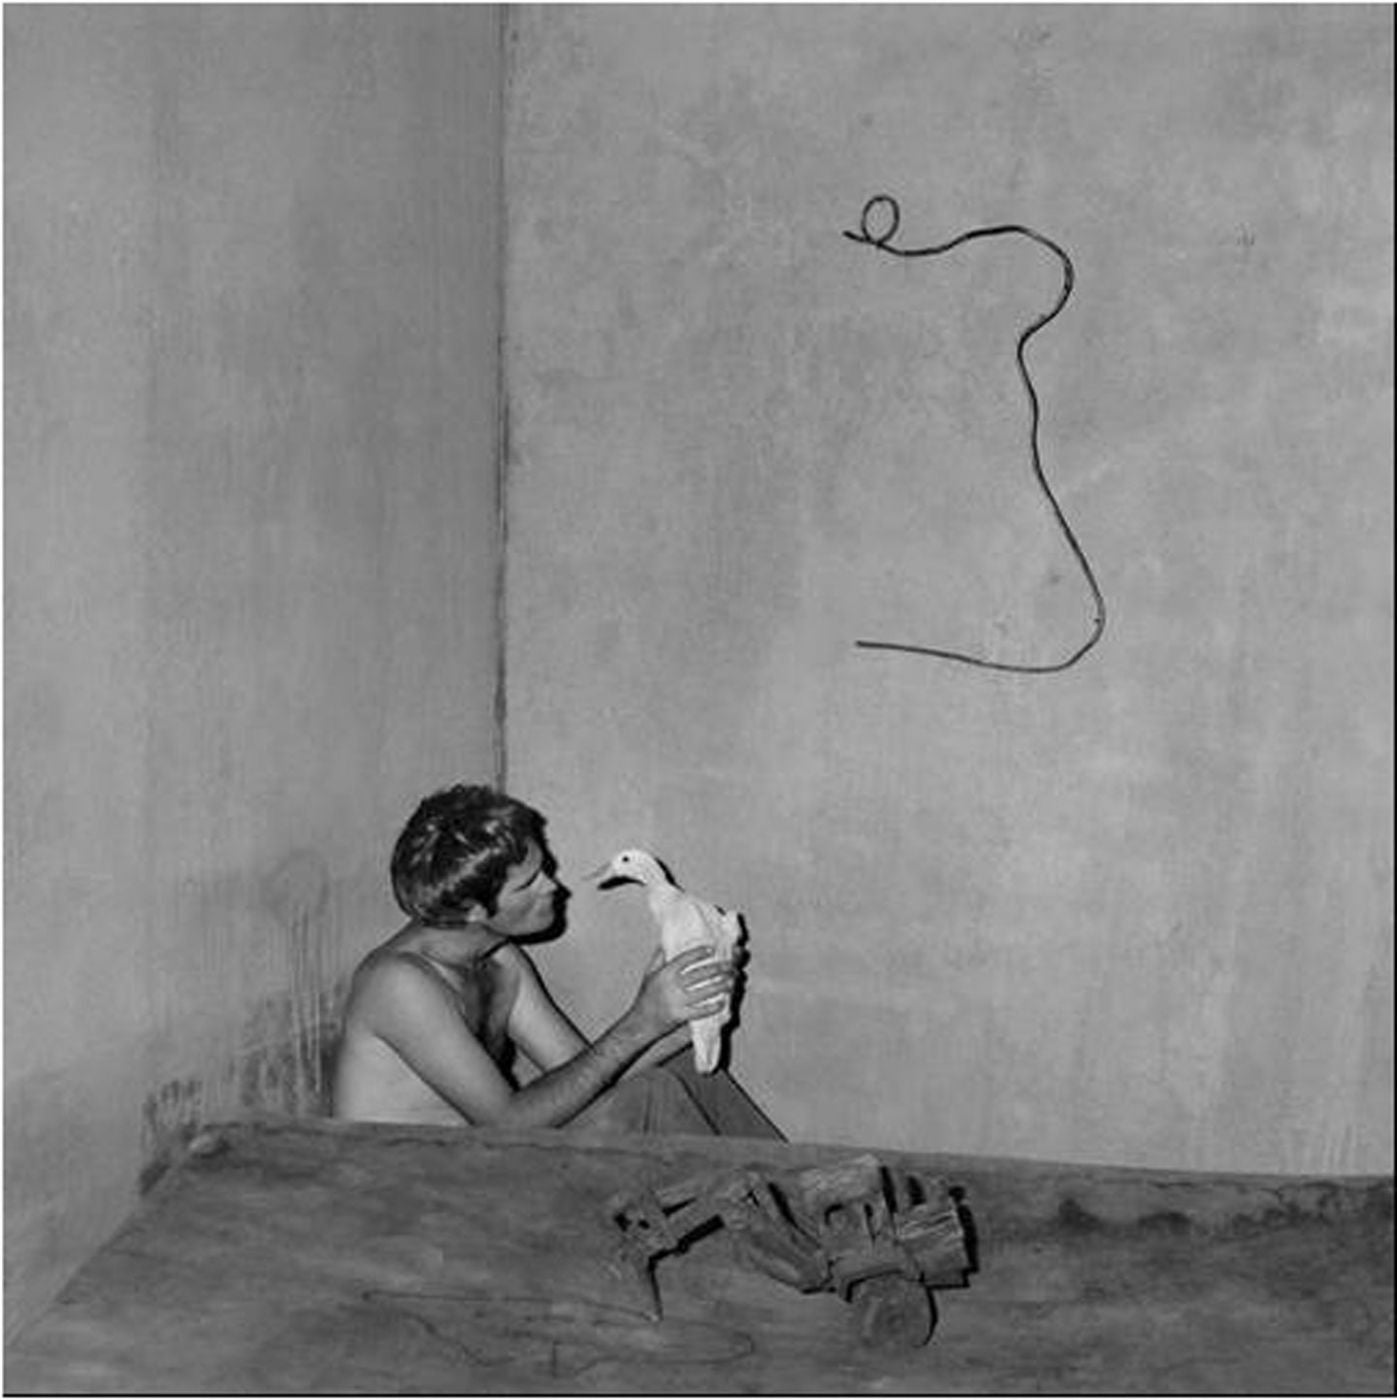 Roger Ballen: Boarding House, Limited Edition (with Gelatin Silver Print, "Contemplation, 2008" Variant)